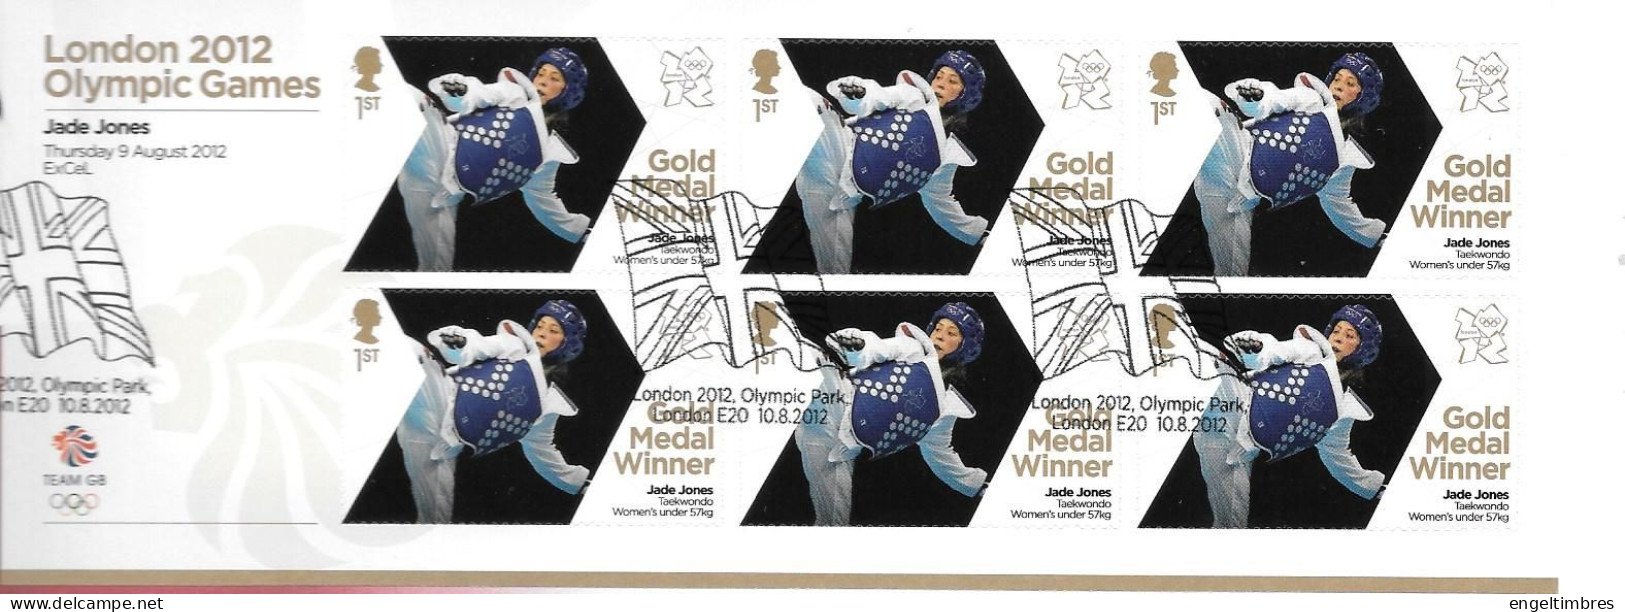 Gb 2012 Olympics GOLD MEDAL WINNER Sheet Of 6 Stamps FDC -  JADE JONES  -- SEE  NOTES SEE NOTES - Unused Stamps